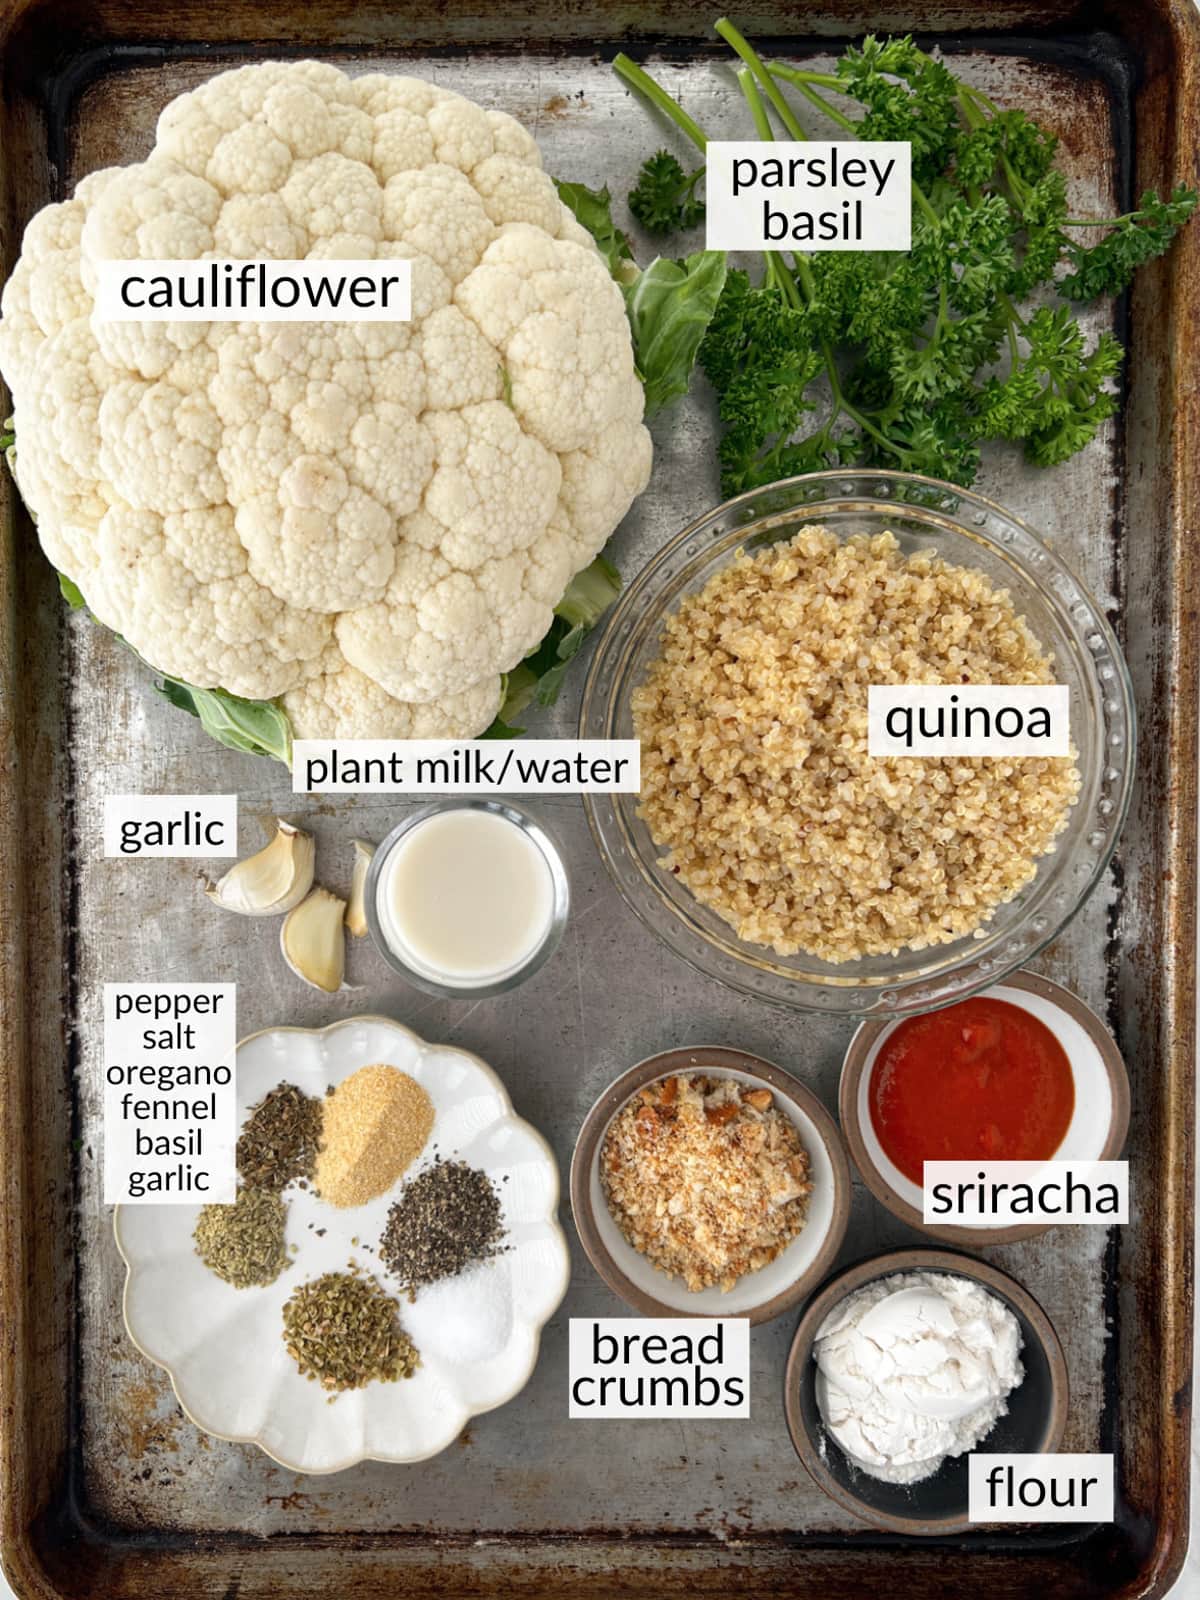 Ingredients for vegan meatballs made with cauliflower and quinoa.